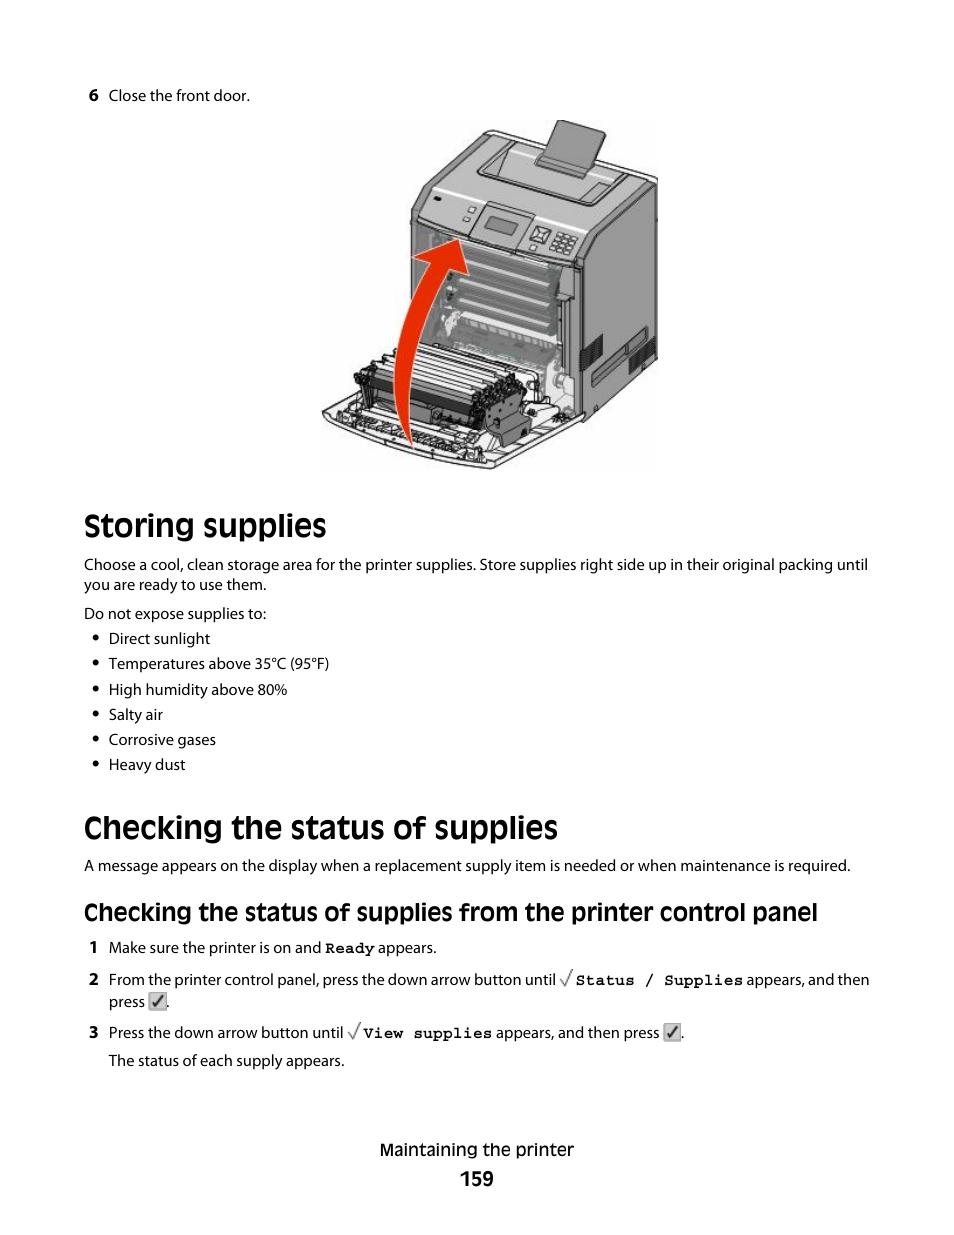 Storing supplies, Checking the status of supplies | Lexmark 280 User Manual | Page 159 / 217